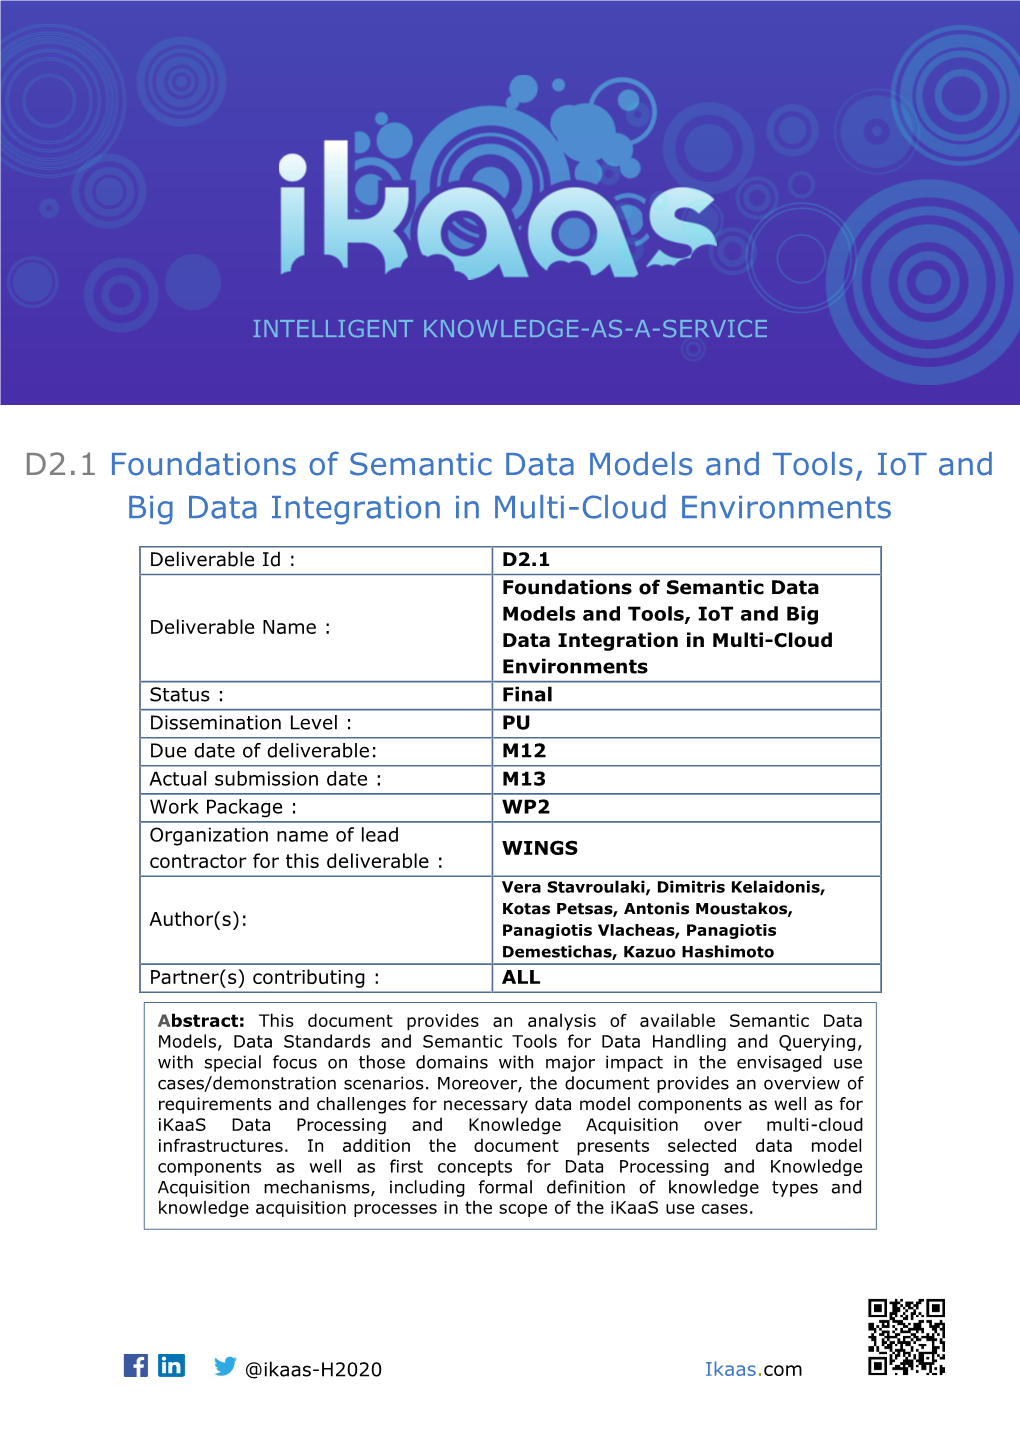 D2.1 Foundations of Semantic Data Models and Tools, Iot and Big Data Integration in Multi-Cloud Environments